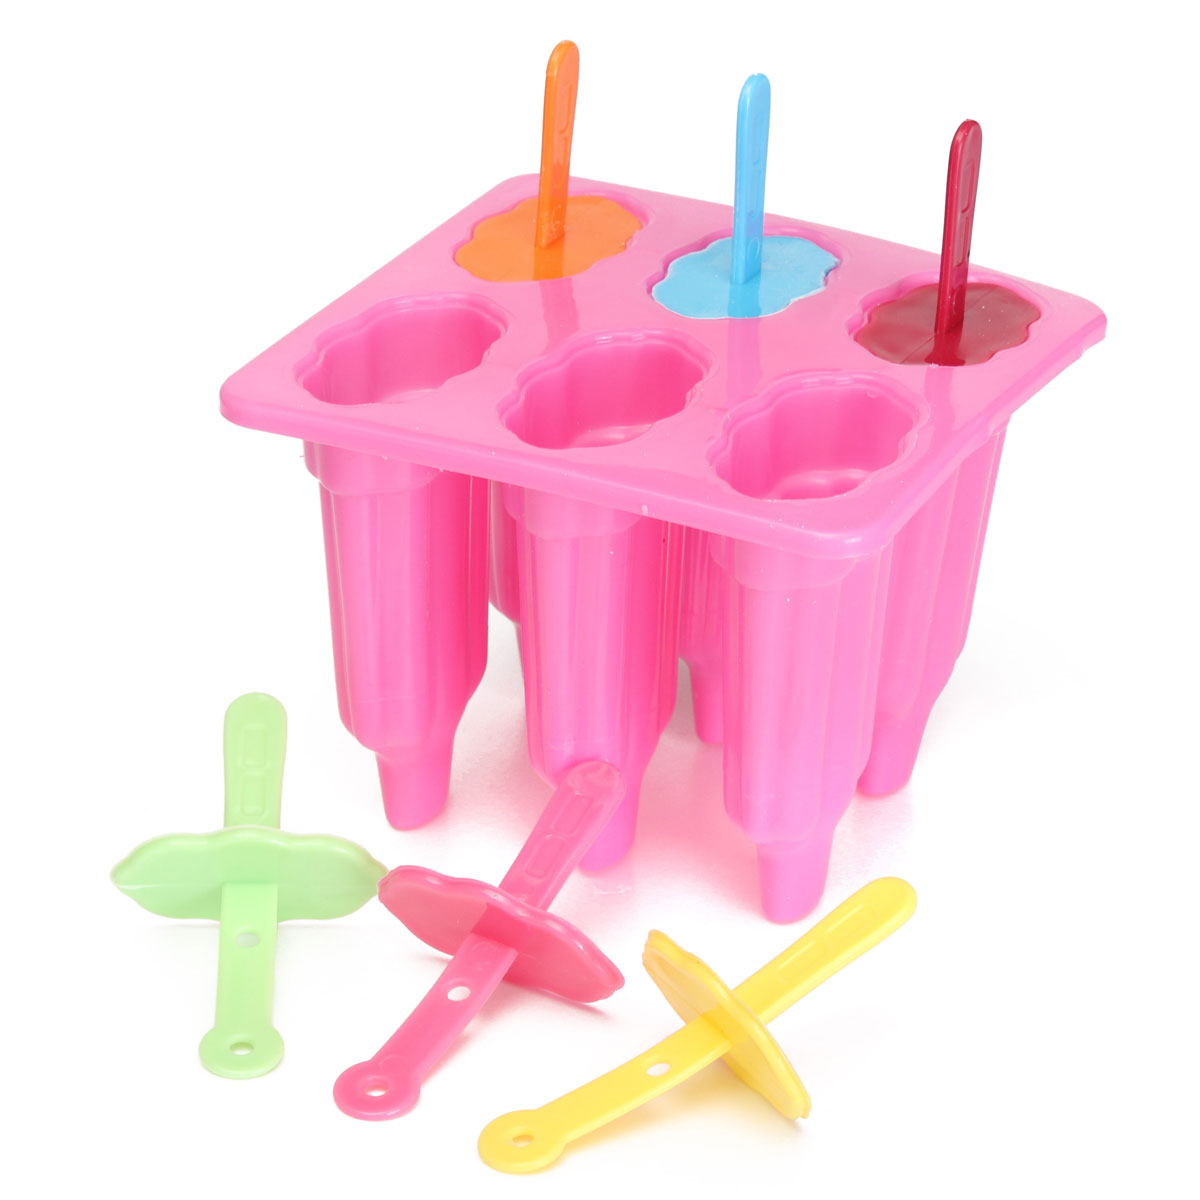 NEW 6 x ICE LOLLY LOLLIES ICE CREAM SUMMER DIY MAKER HUICE POPSICLE ...